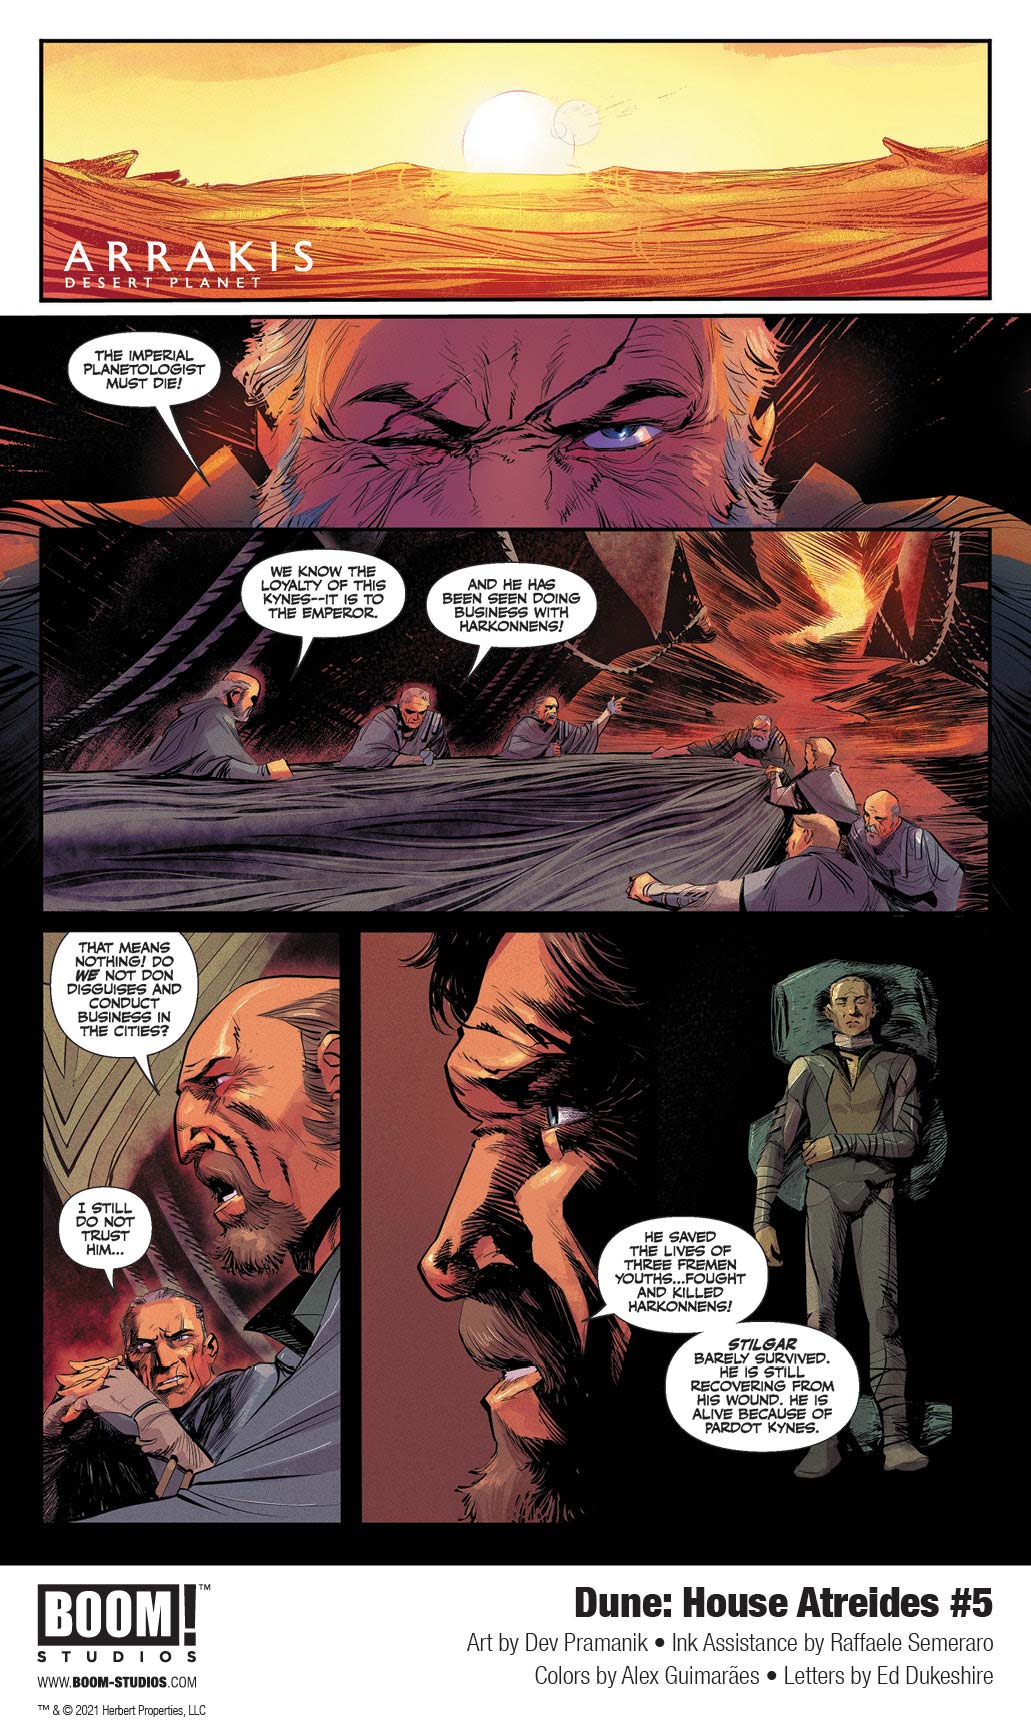 Dune: House Atreides comic series. Issue #5, preview page 1.